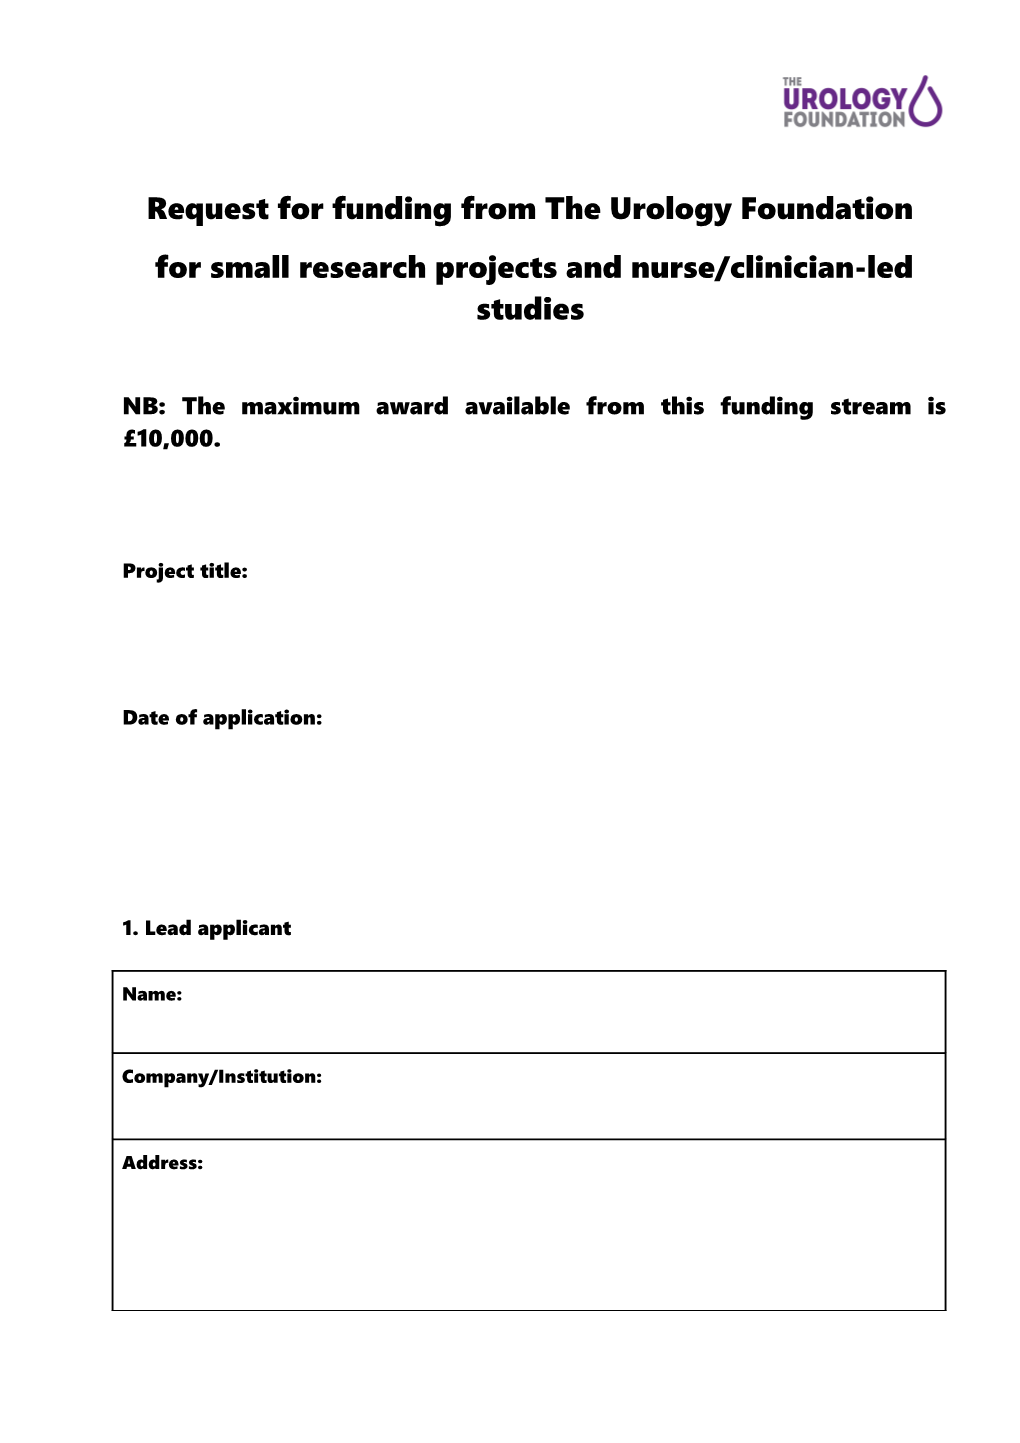 Request for Funding from the Urology Foundation